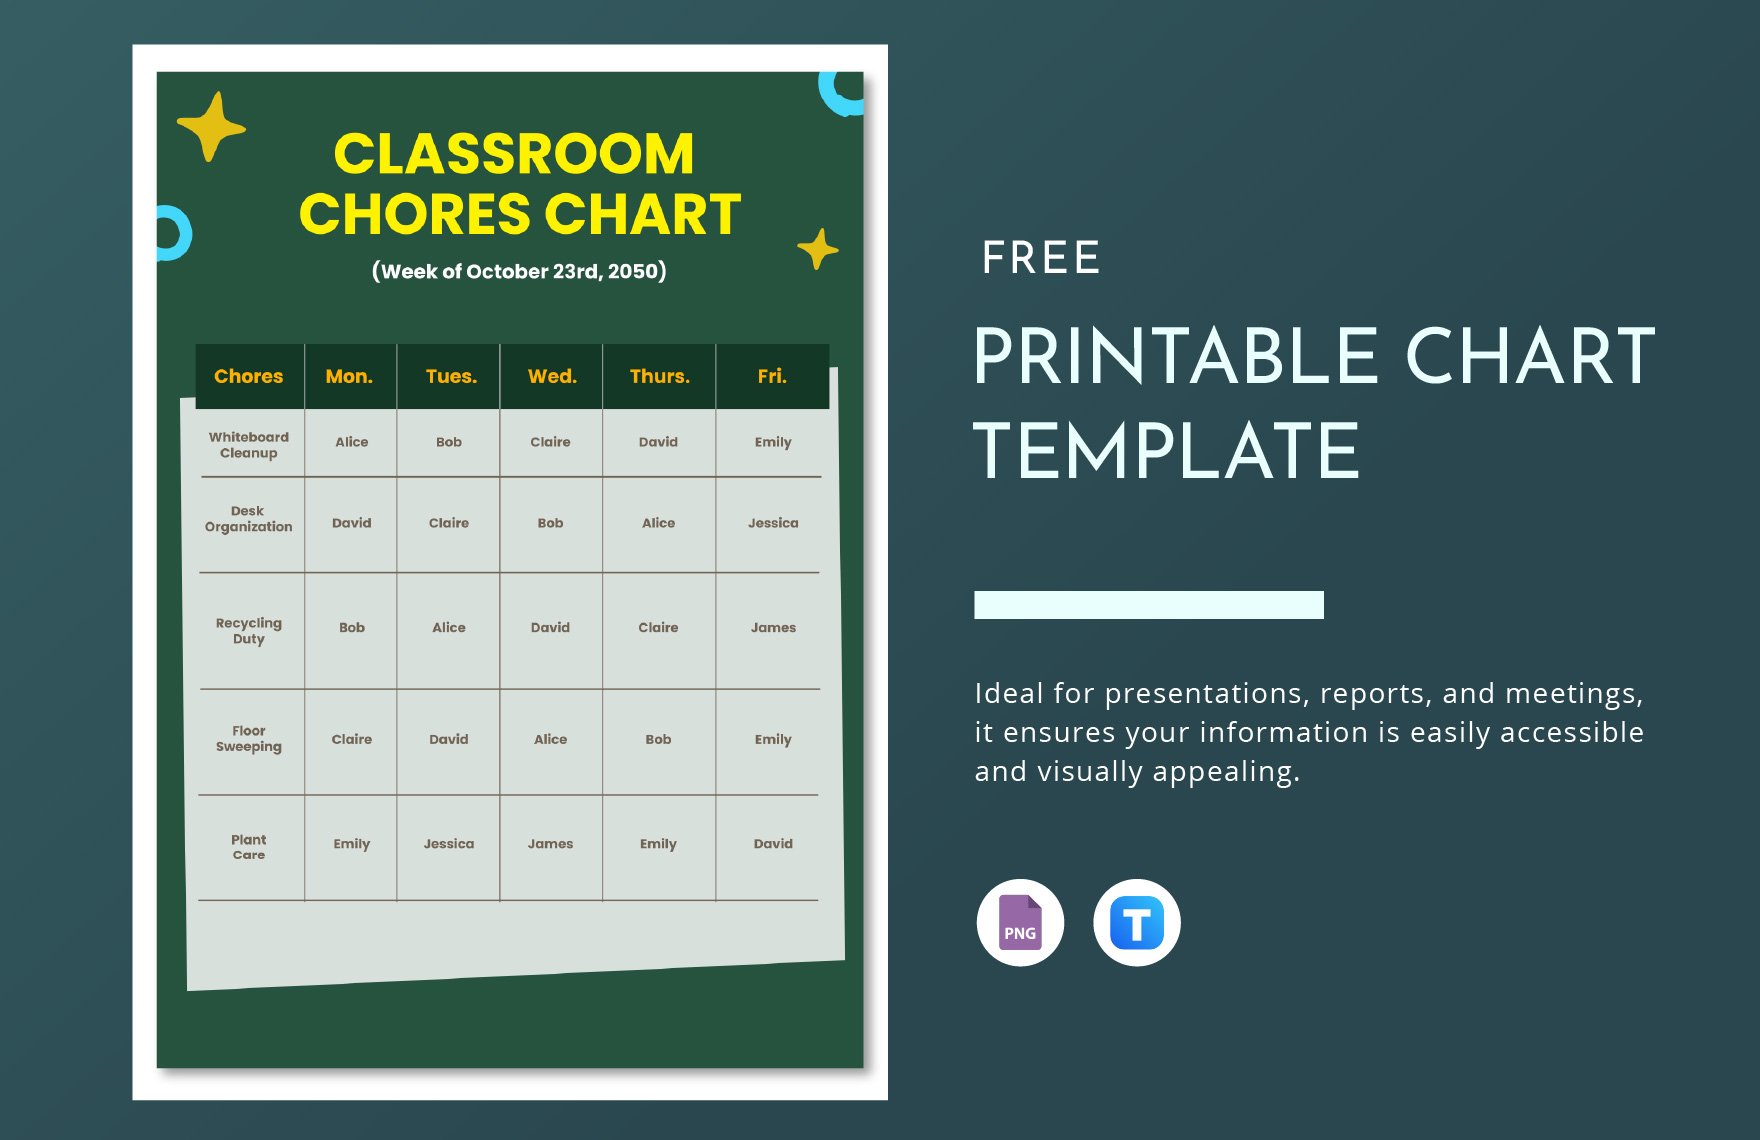 Free Printable Chart Template in PNG